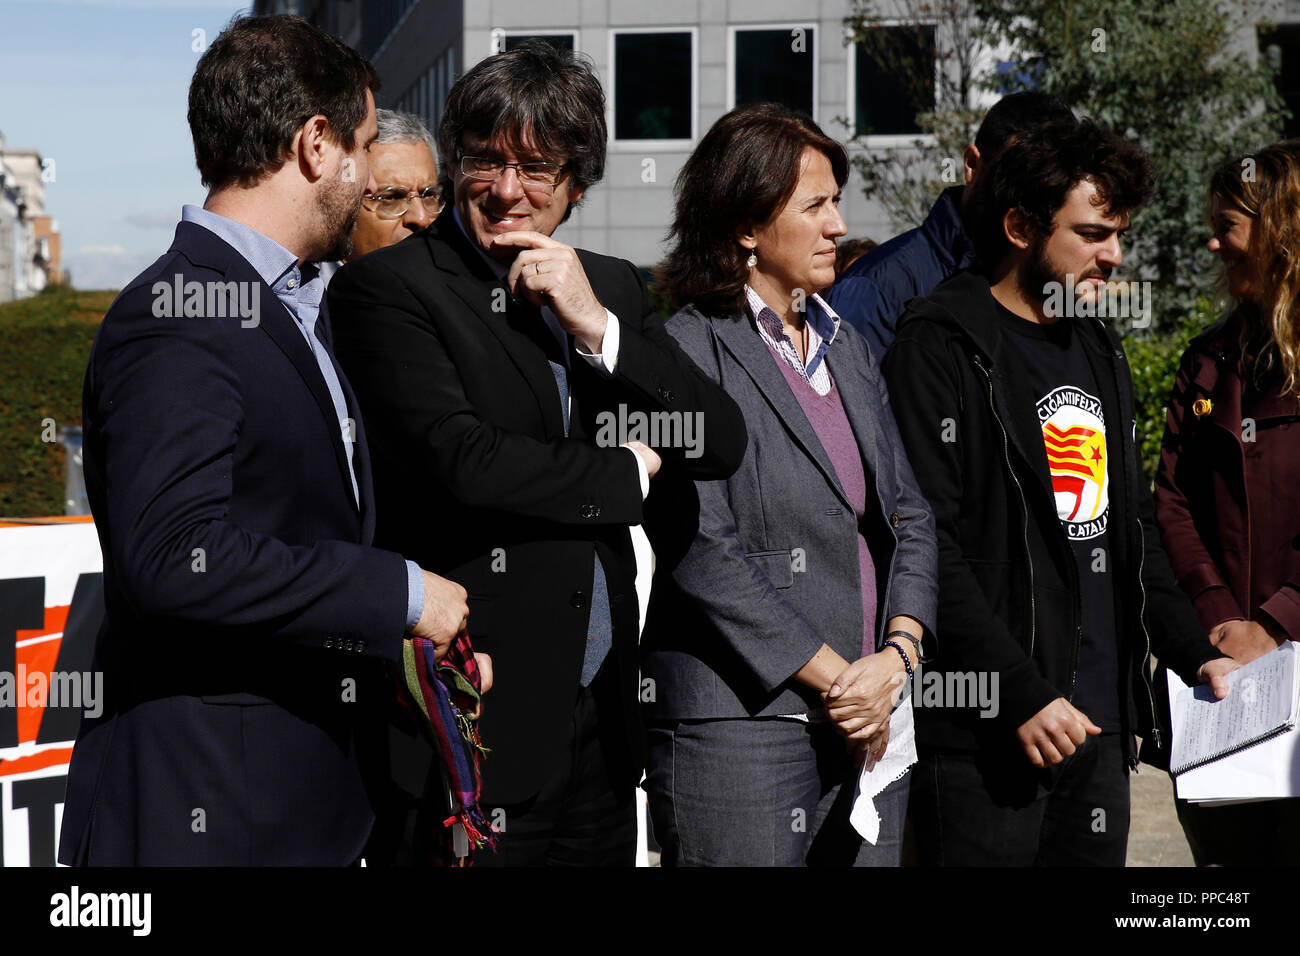 Brussels, Belgium. 25th Sep. 2018.Former President of the Generalitat of Catalonia, Carles Puigdemont attends in a protest of support arrested members of former Catalan government .Alexandros Michailidis/Alamy Live News Stock Photo